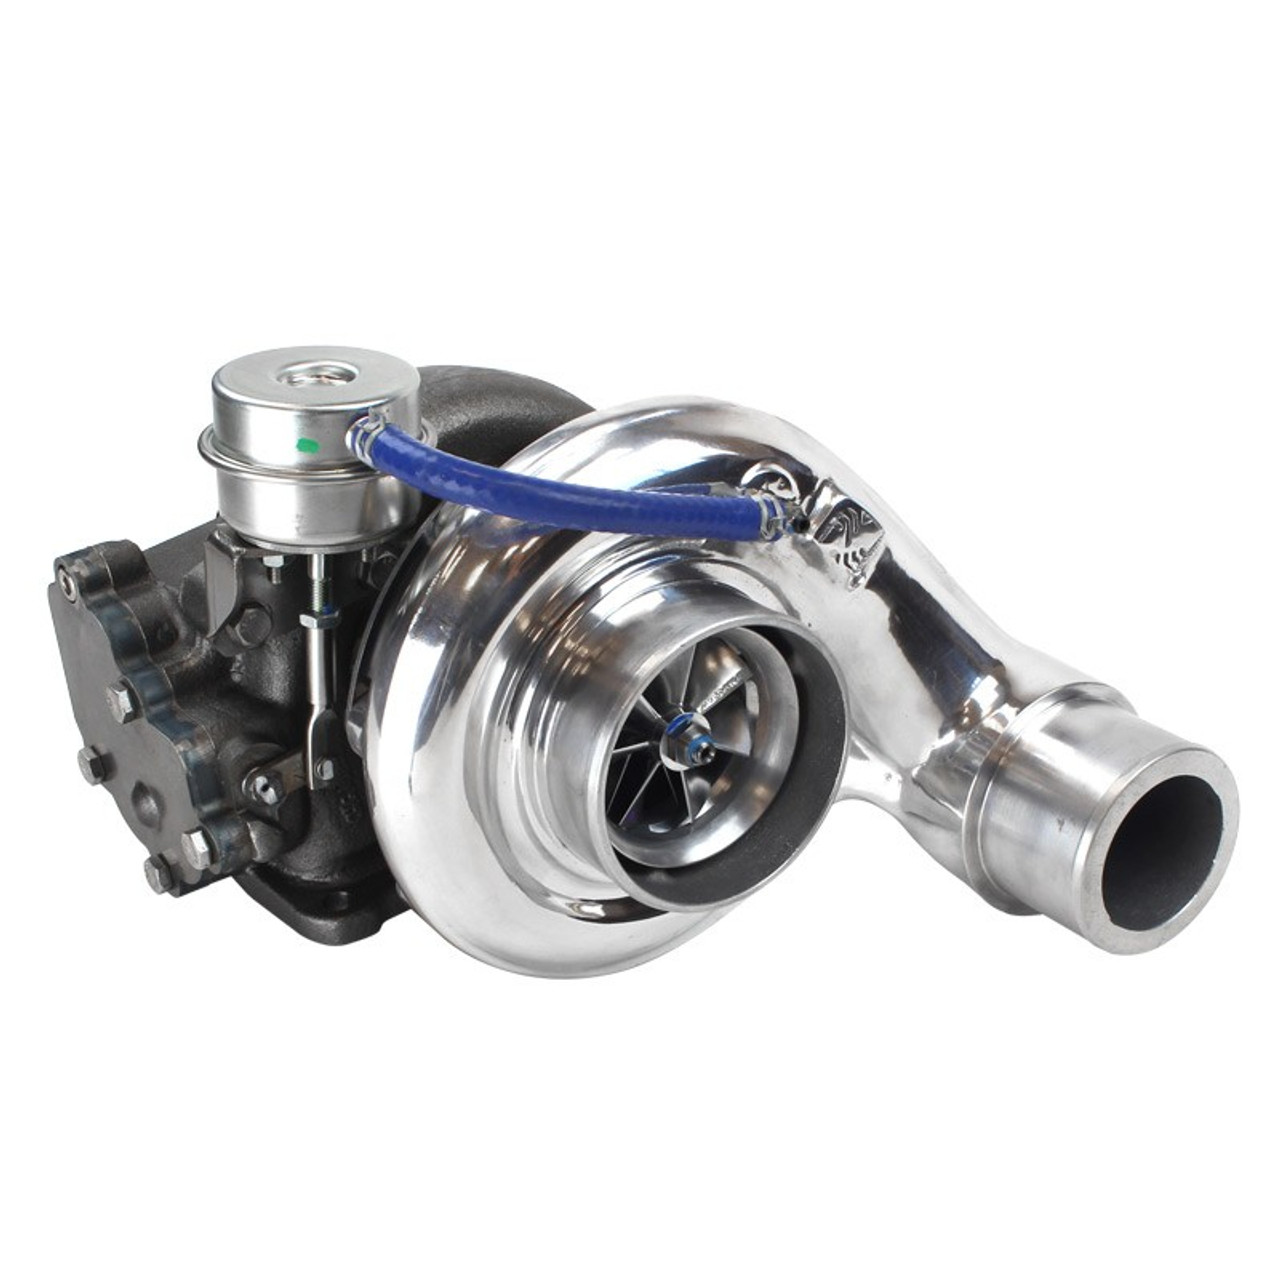 INDUSTRIAL INJECTION SILVER BULLET PHATSHAFT 64 TURBO 2003-2004 DODGE 5.9L CUMMINS (WITH FUEL MODIFICATIONS) (II364241741A)angle view